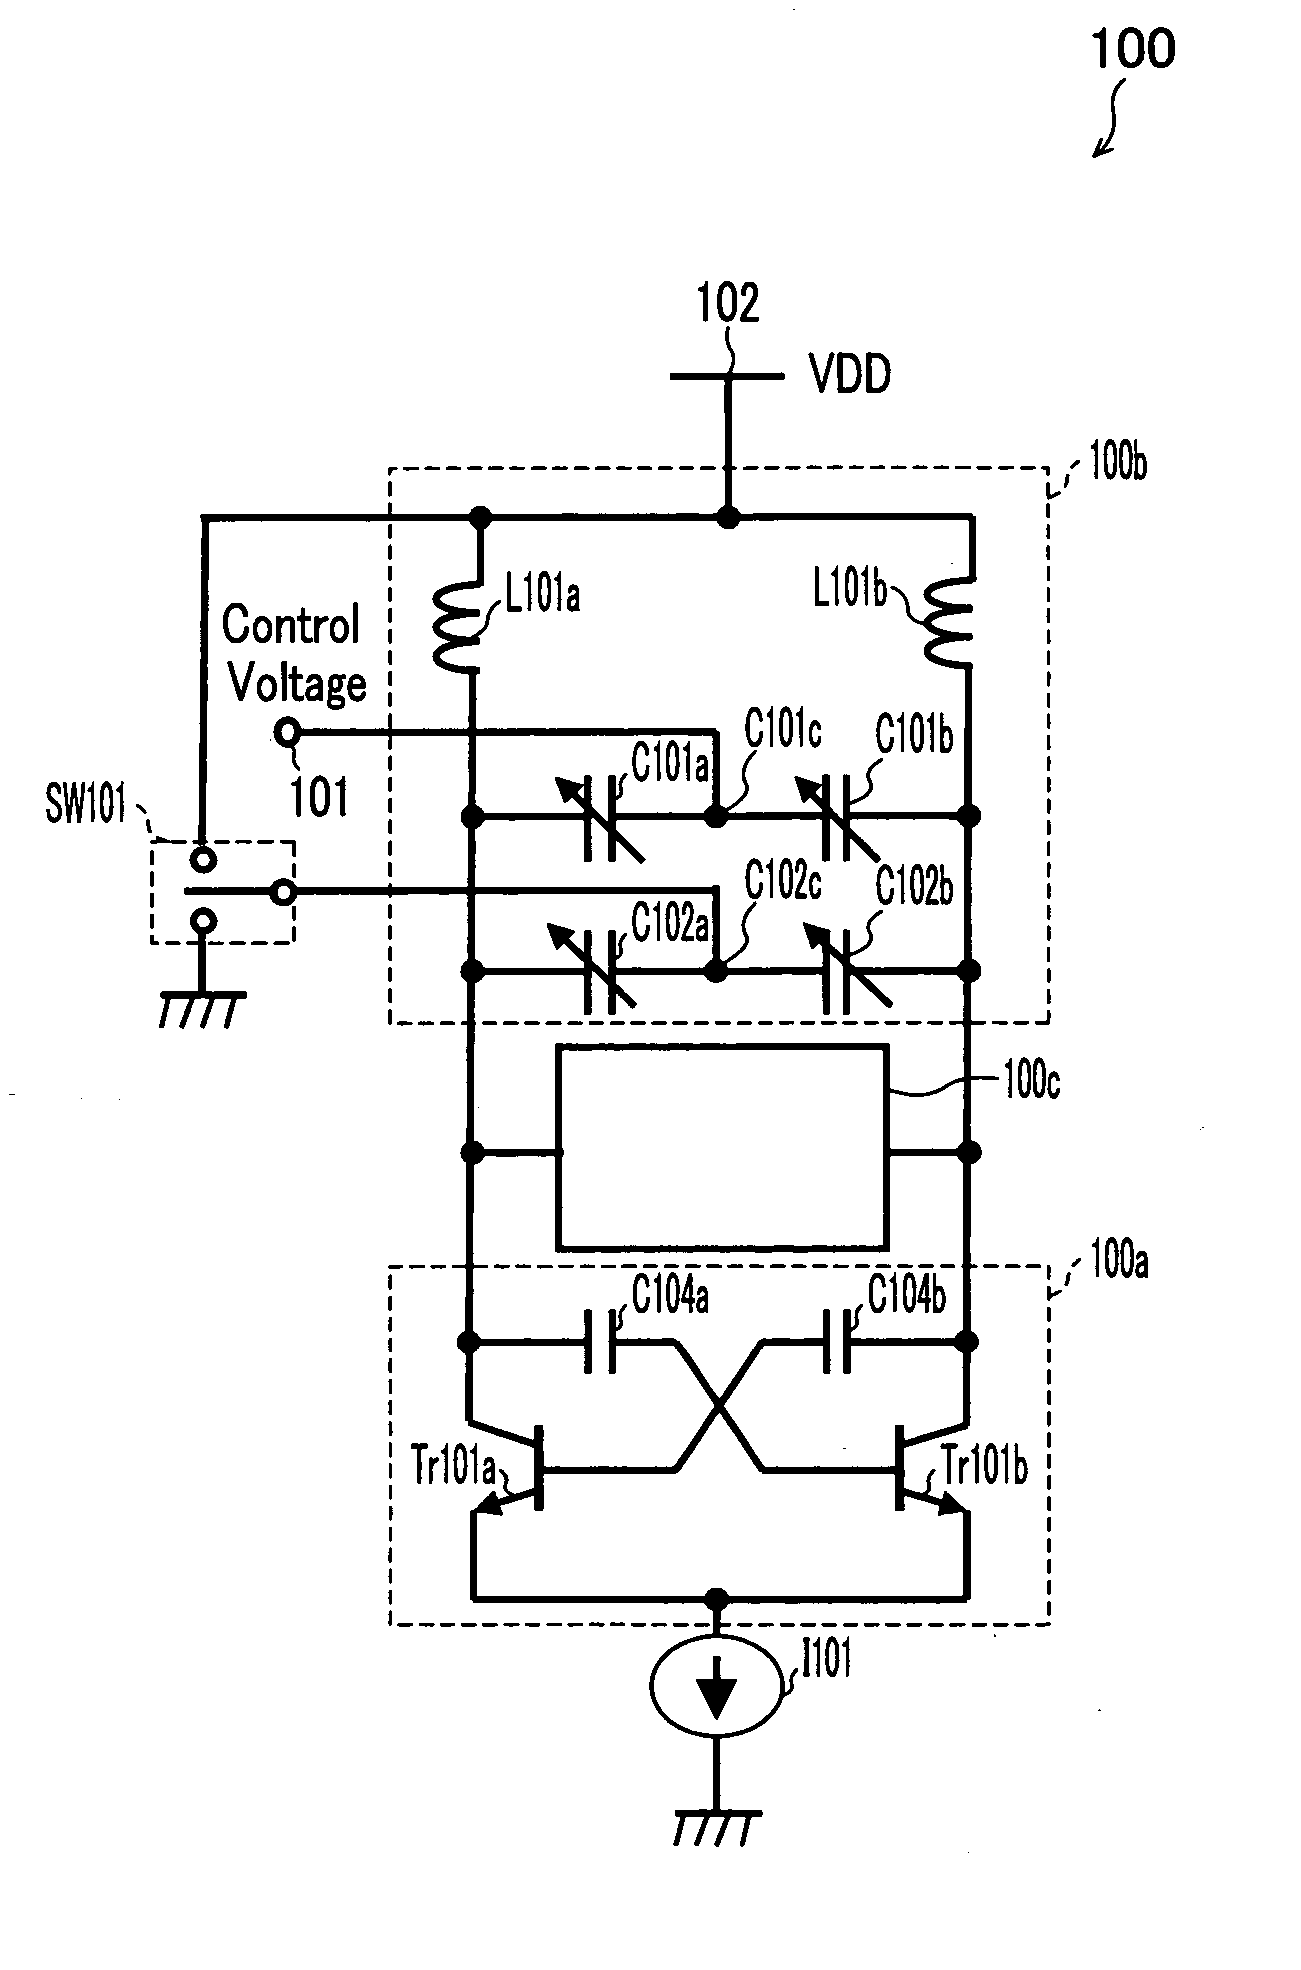 Voltage-controlled oscillator, transmitter, and receiver